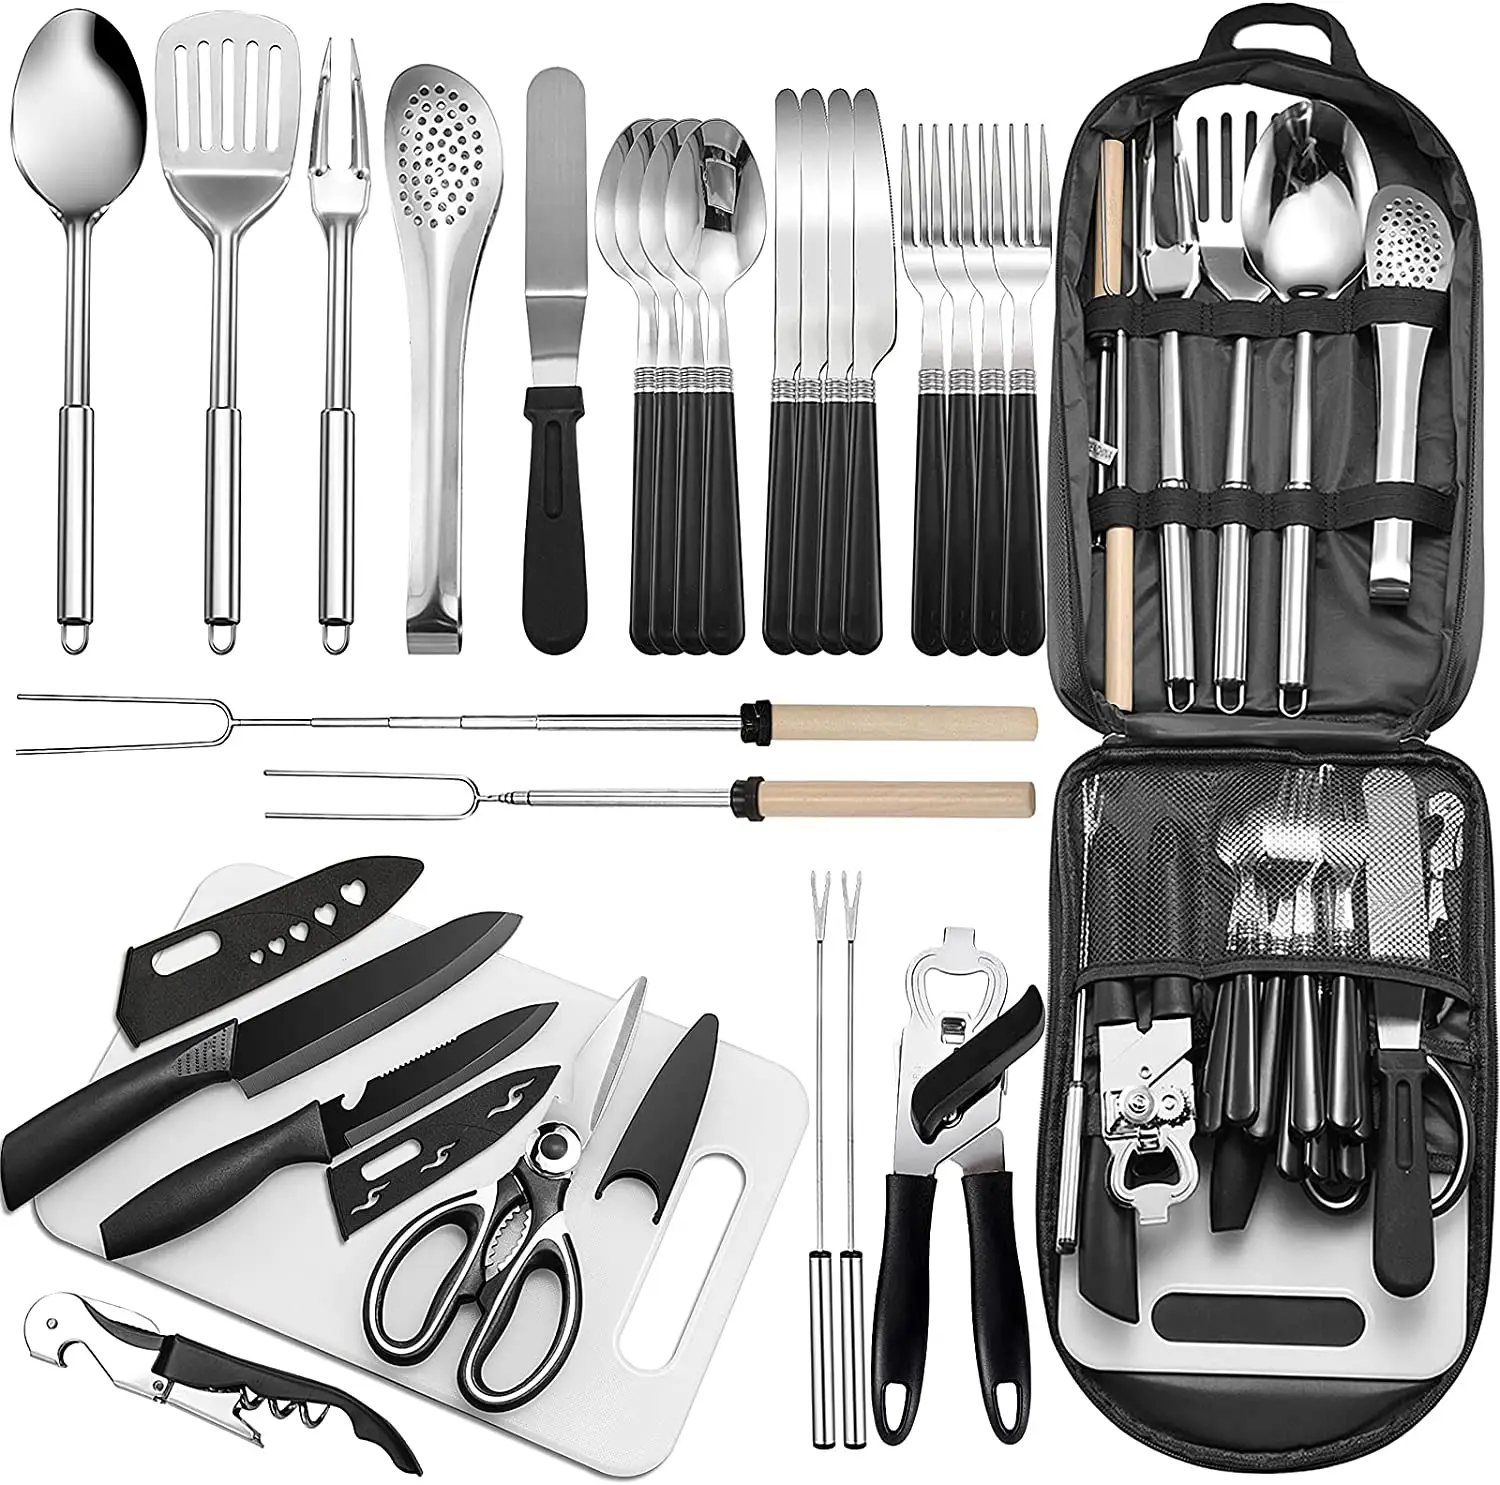 Portable Camping Kitchen Utensil Set-27 Piece Cookware Kit, Stainless Steel Outdoor Cooking and Grilling Utensil Organizer